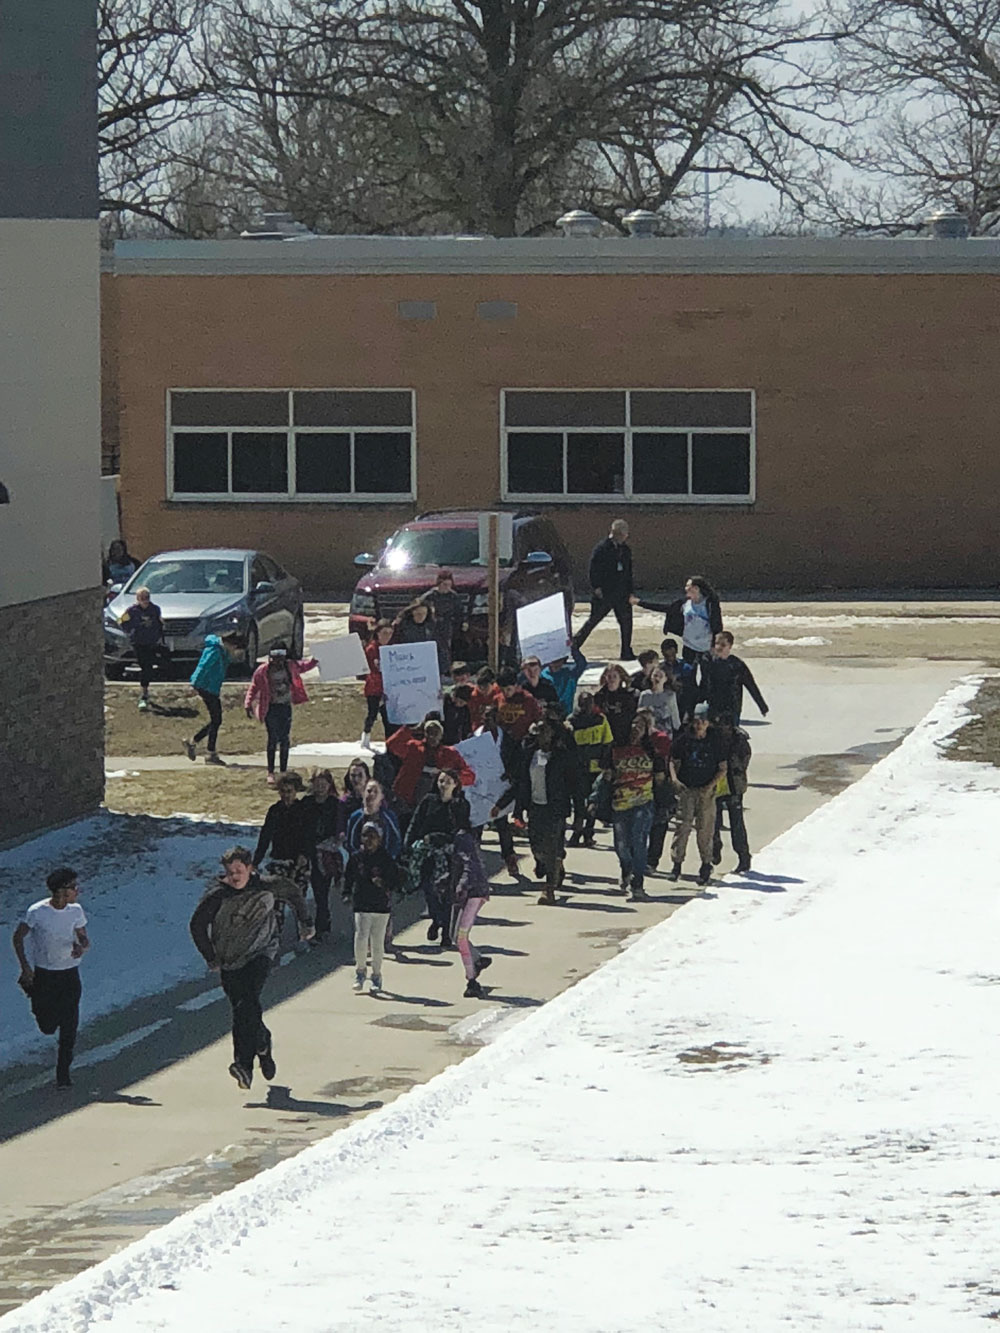 Charles City Middle School students take action, voices heard on gun violence